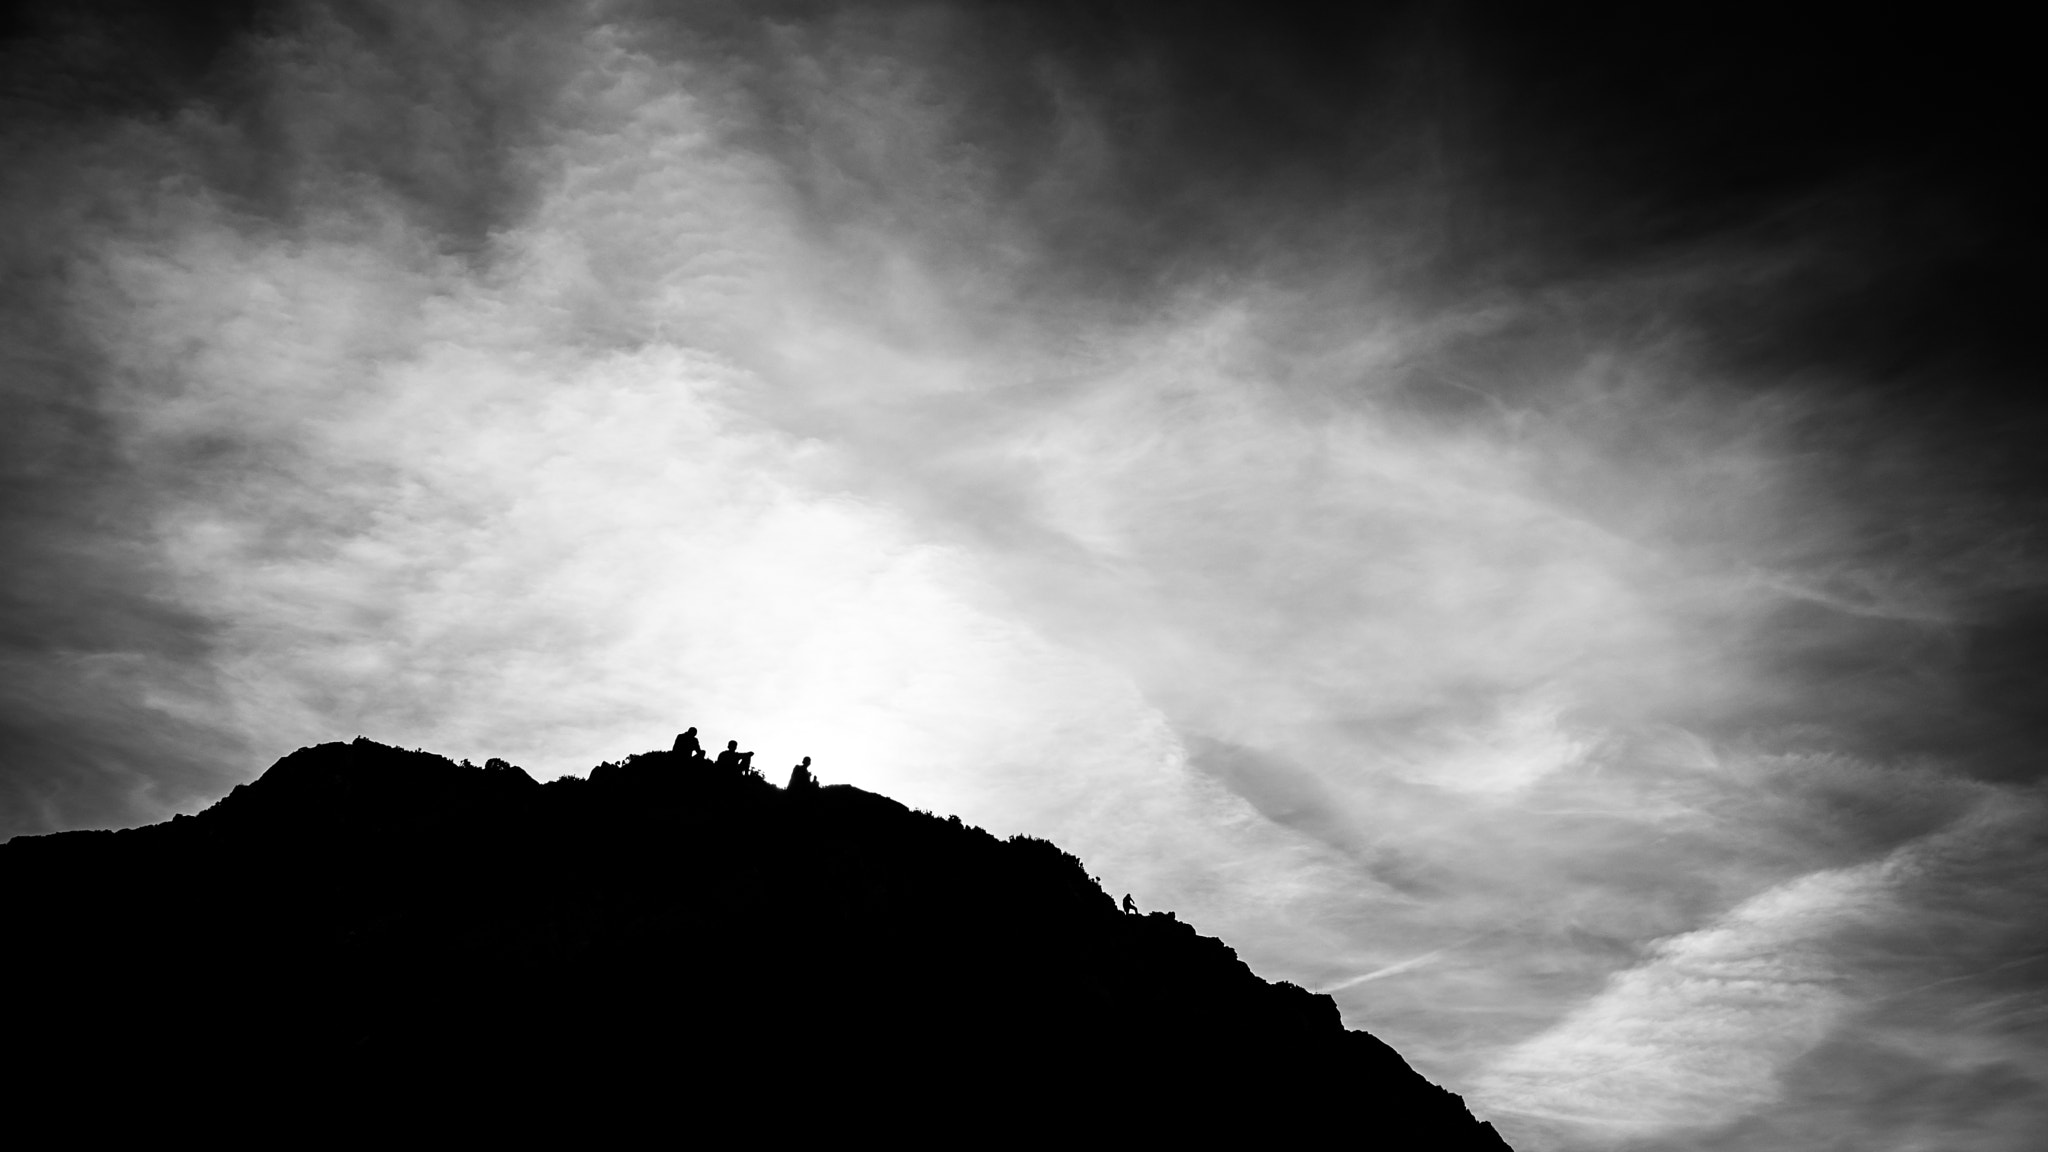 Fujifilm X-Pro2 sample photo. People on the hill - howth, ireland - black and white street photography photography